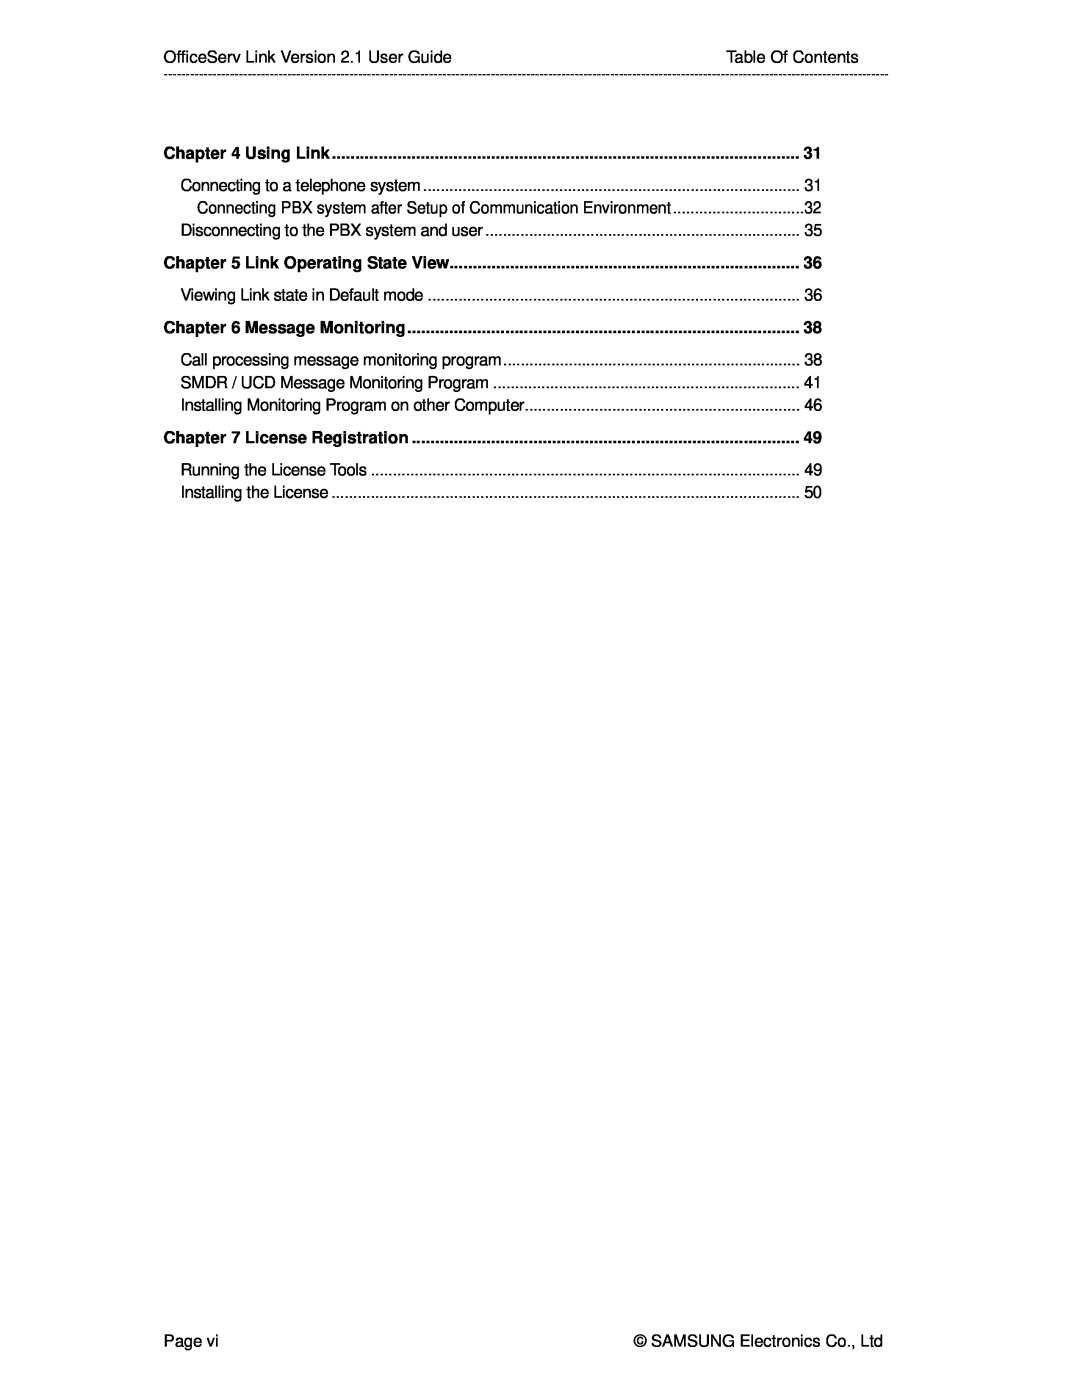 Samsung Version 2.1 Table Of Contents, Using Link, Message Monitoring, Link Operating State View, License Registration 